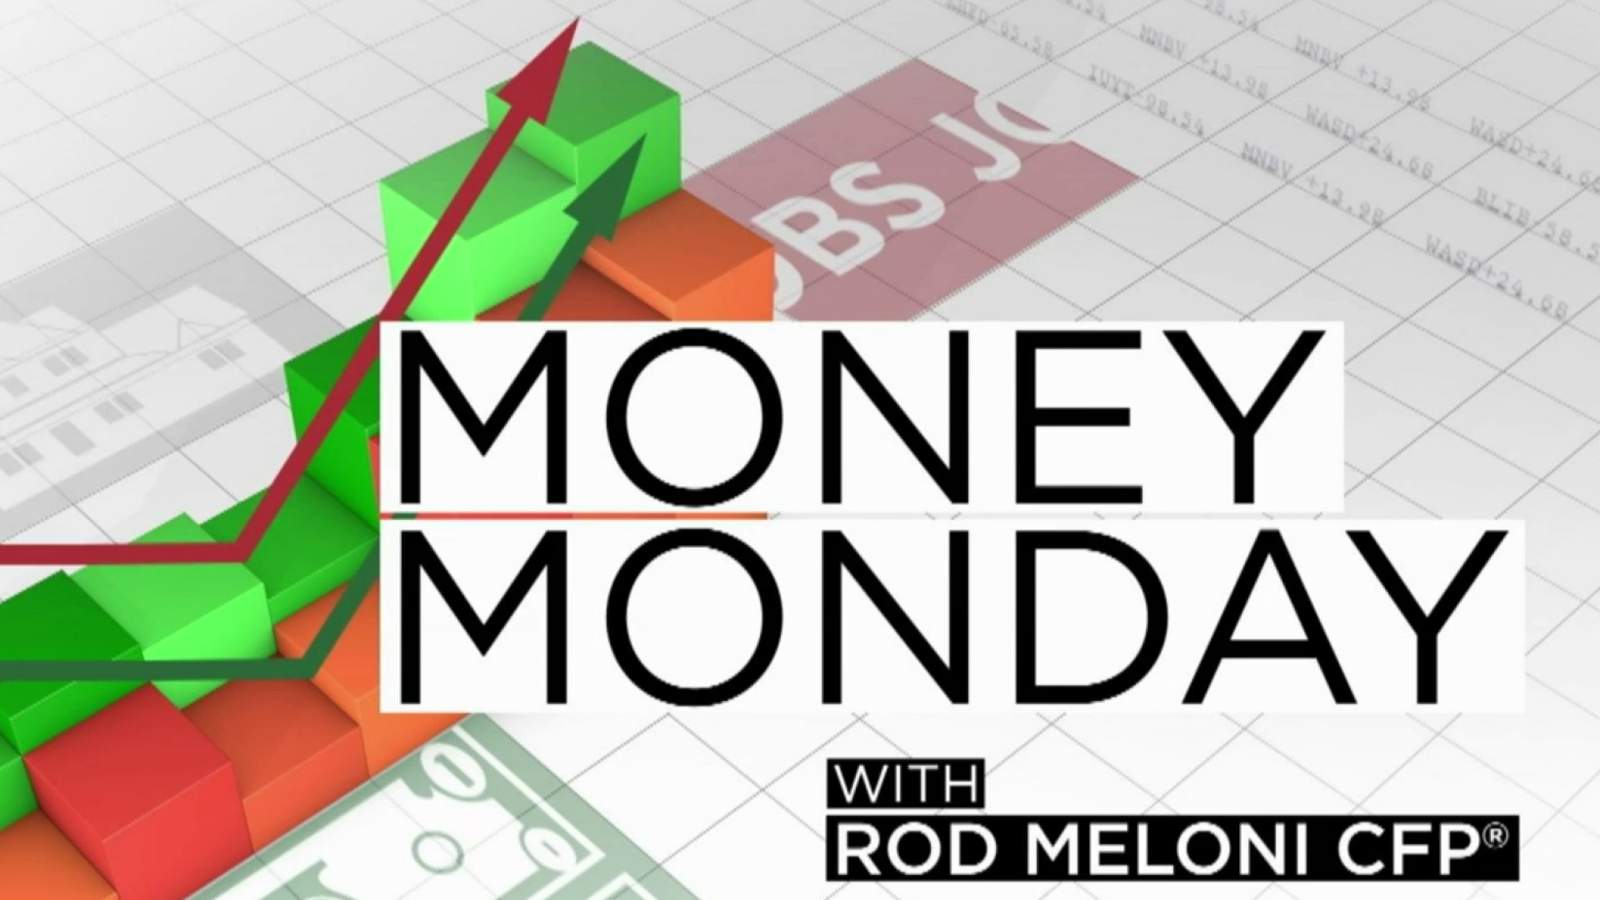 Money Monday: Tax deadlines extended for 2nd year amid pandemic